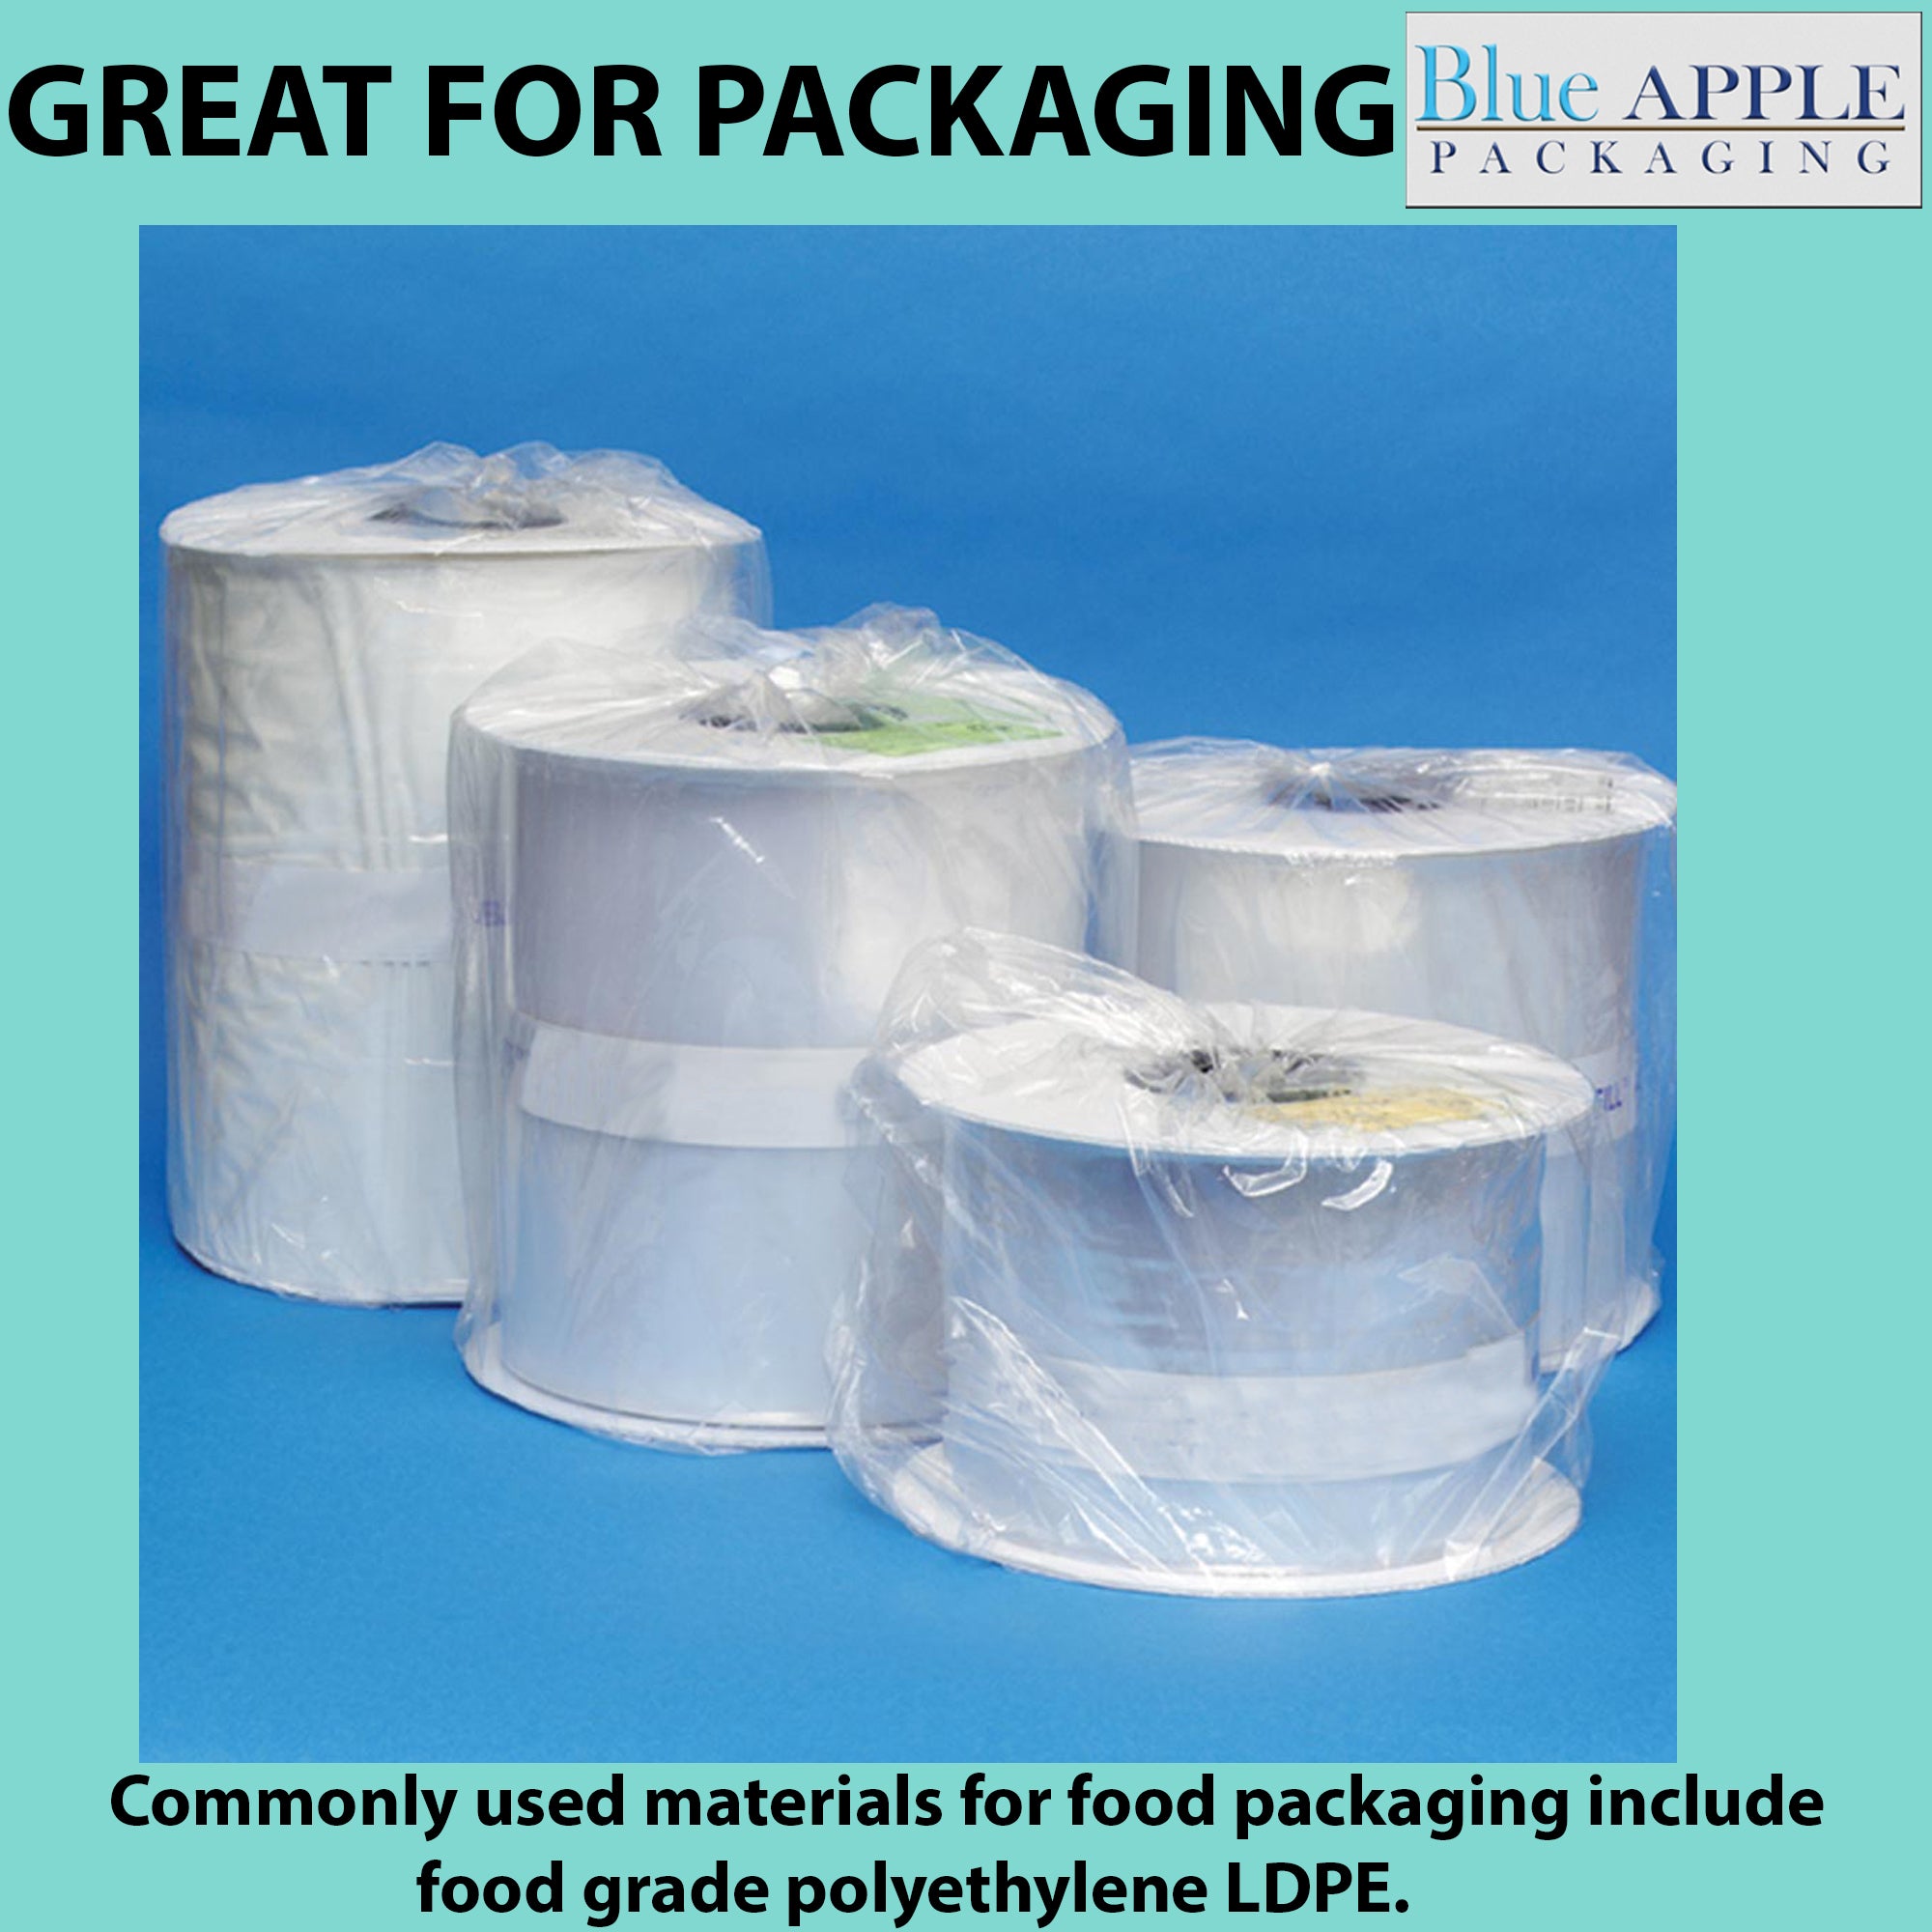 Autobag Heavy Perforated Roll Auto Fill Poly Bags- 3"x4", 2.75 Mil - 2000 Bags